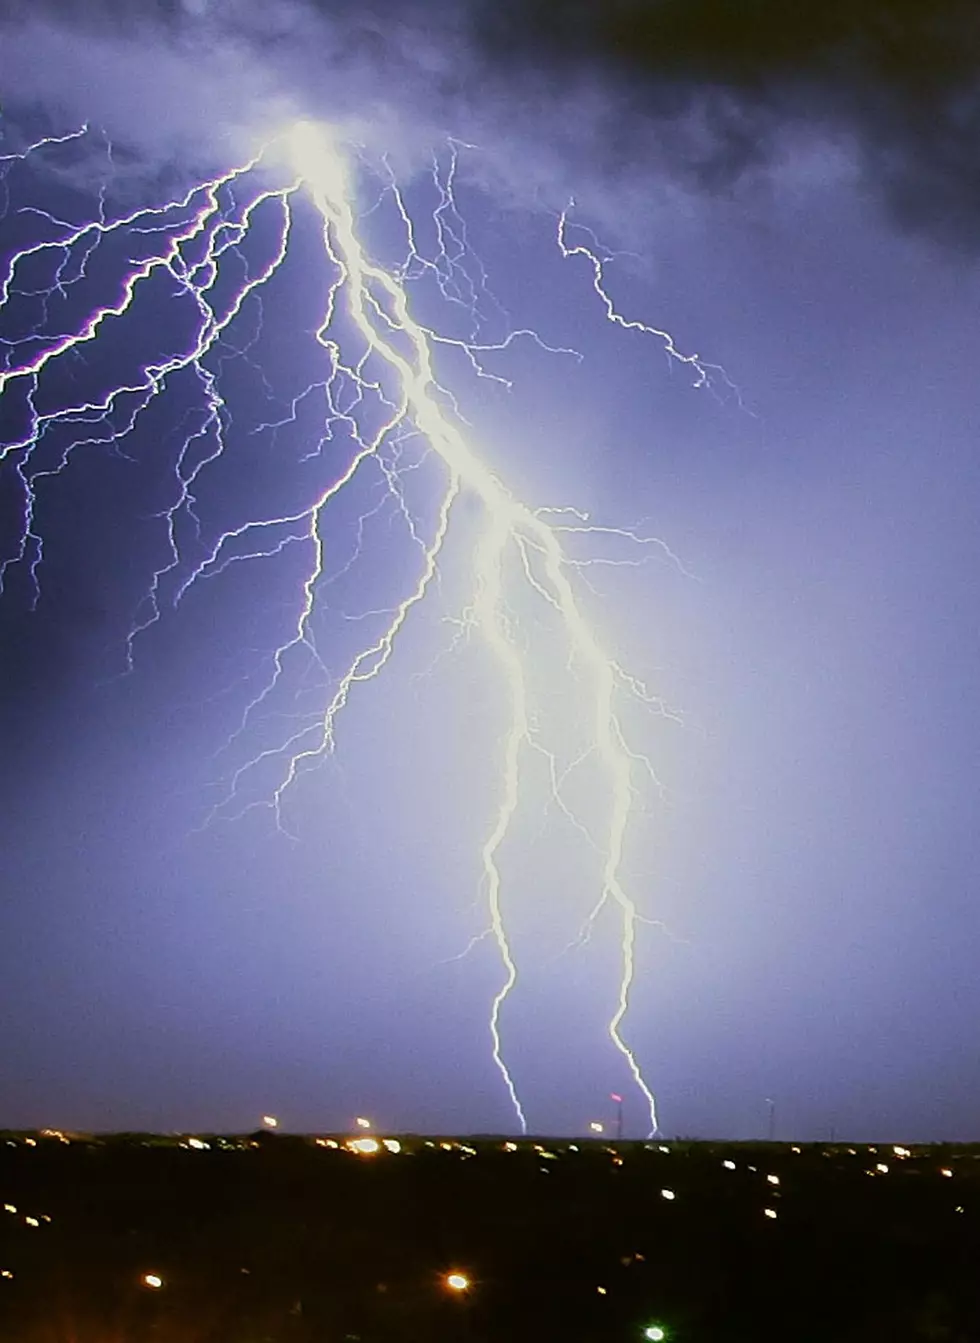 Free Beer & Hot Wings: Bolt of Lightning Nearly Strikes Couple Taking Selfie [Video]